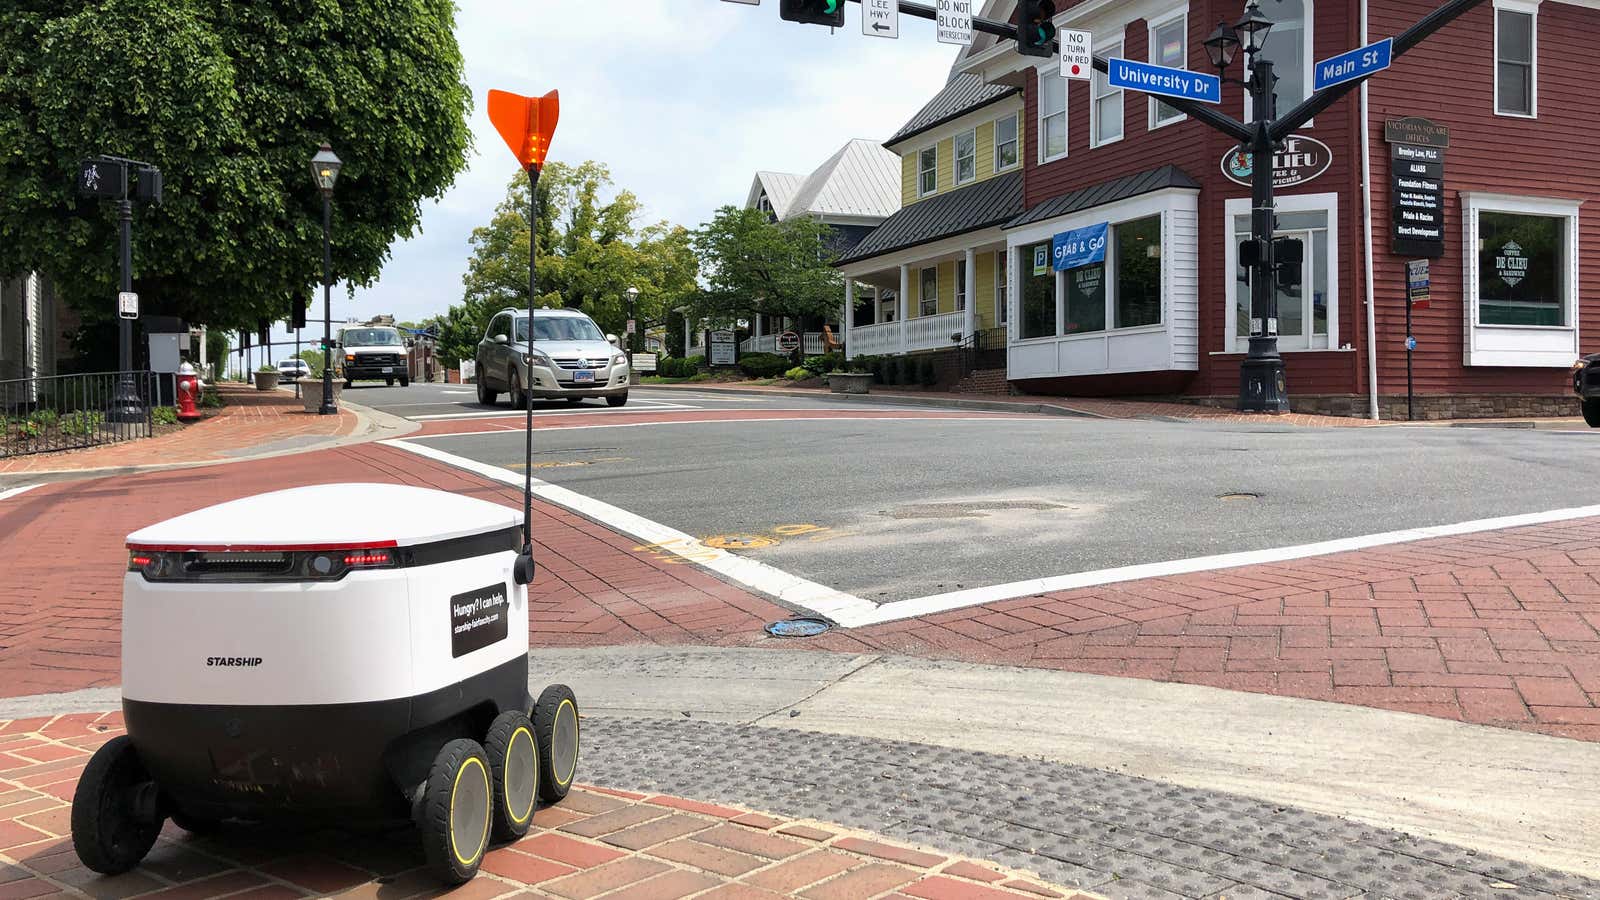 This little delivery robot is here to bring you stockpiled toilet paper.